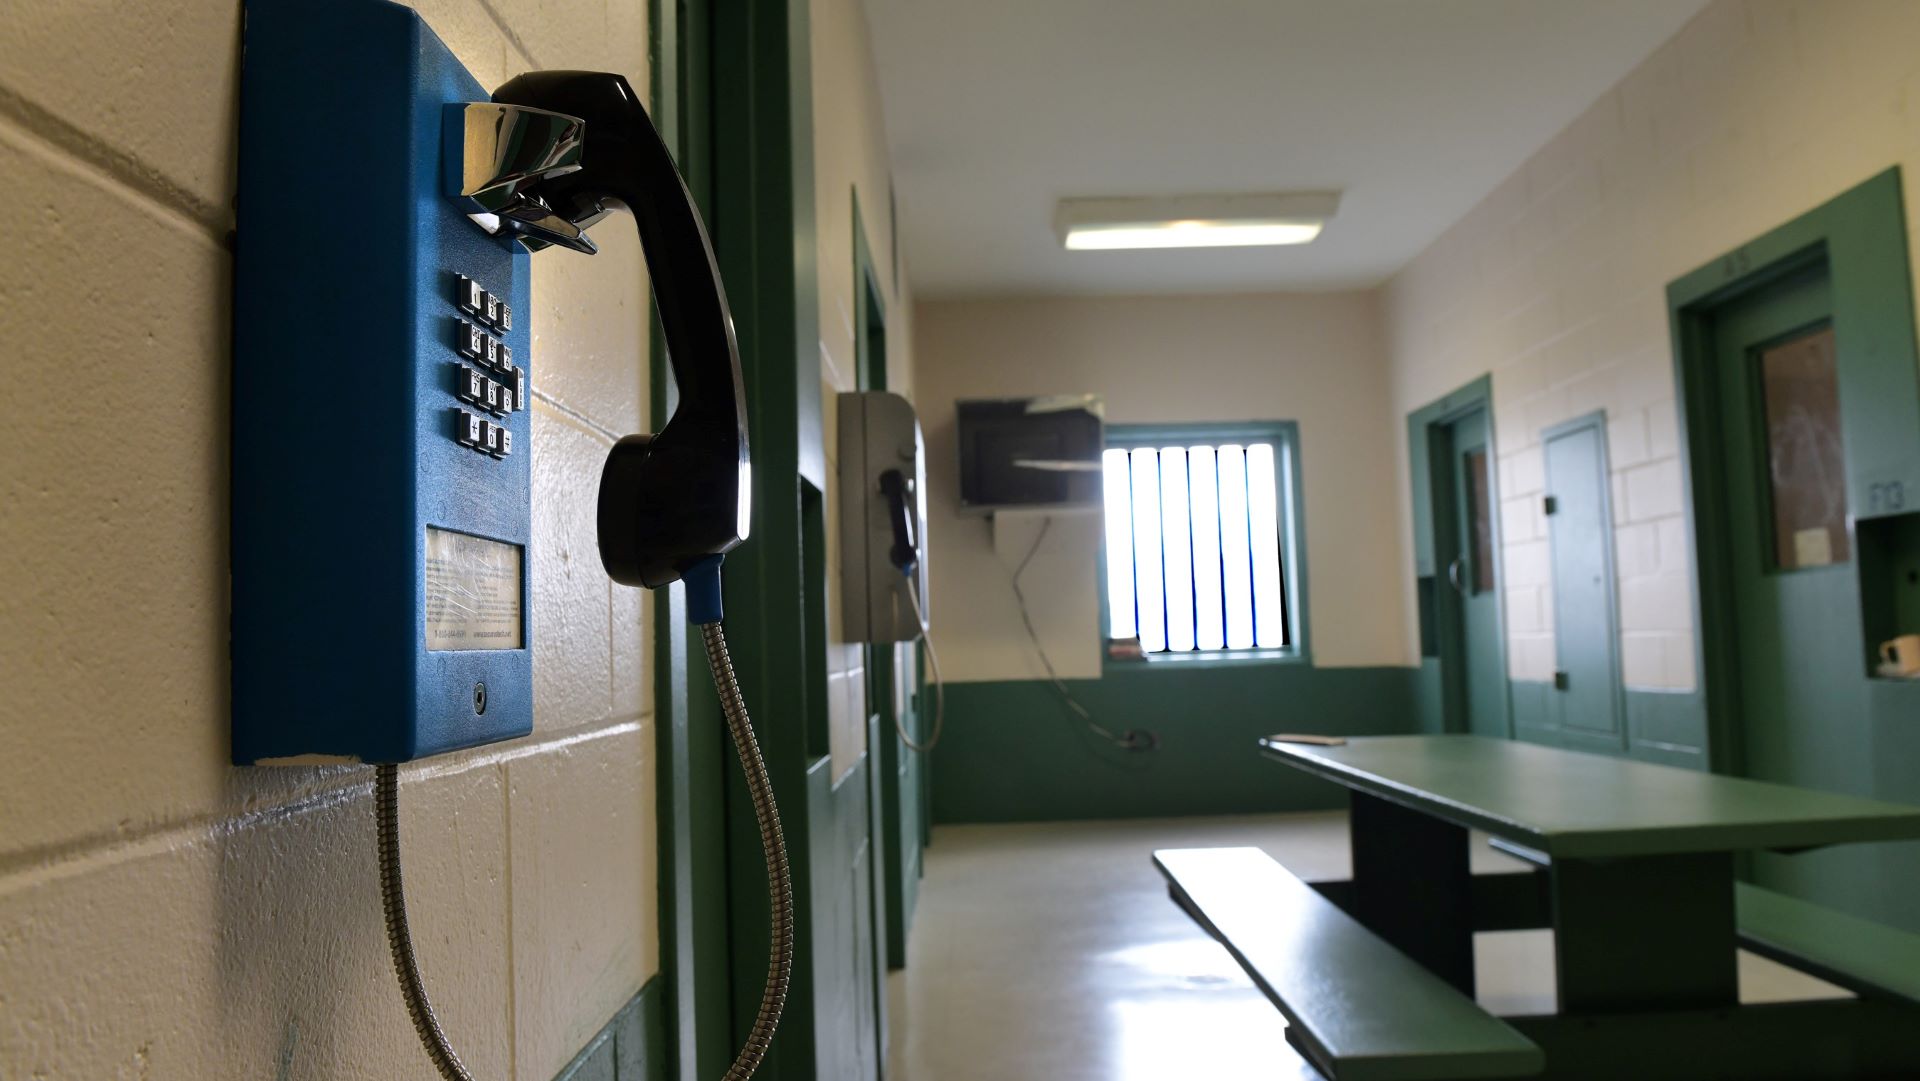 Maine lawmakers consider making jail phone calls to lawyers free